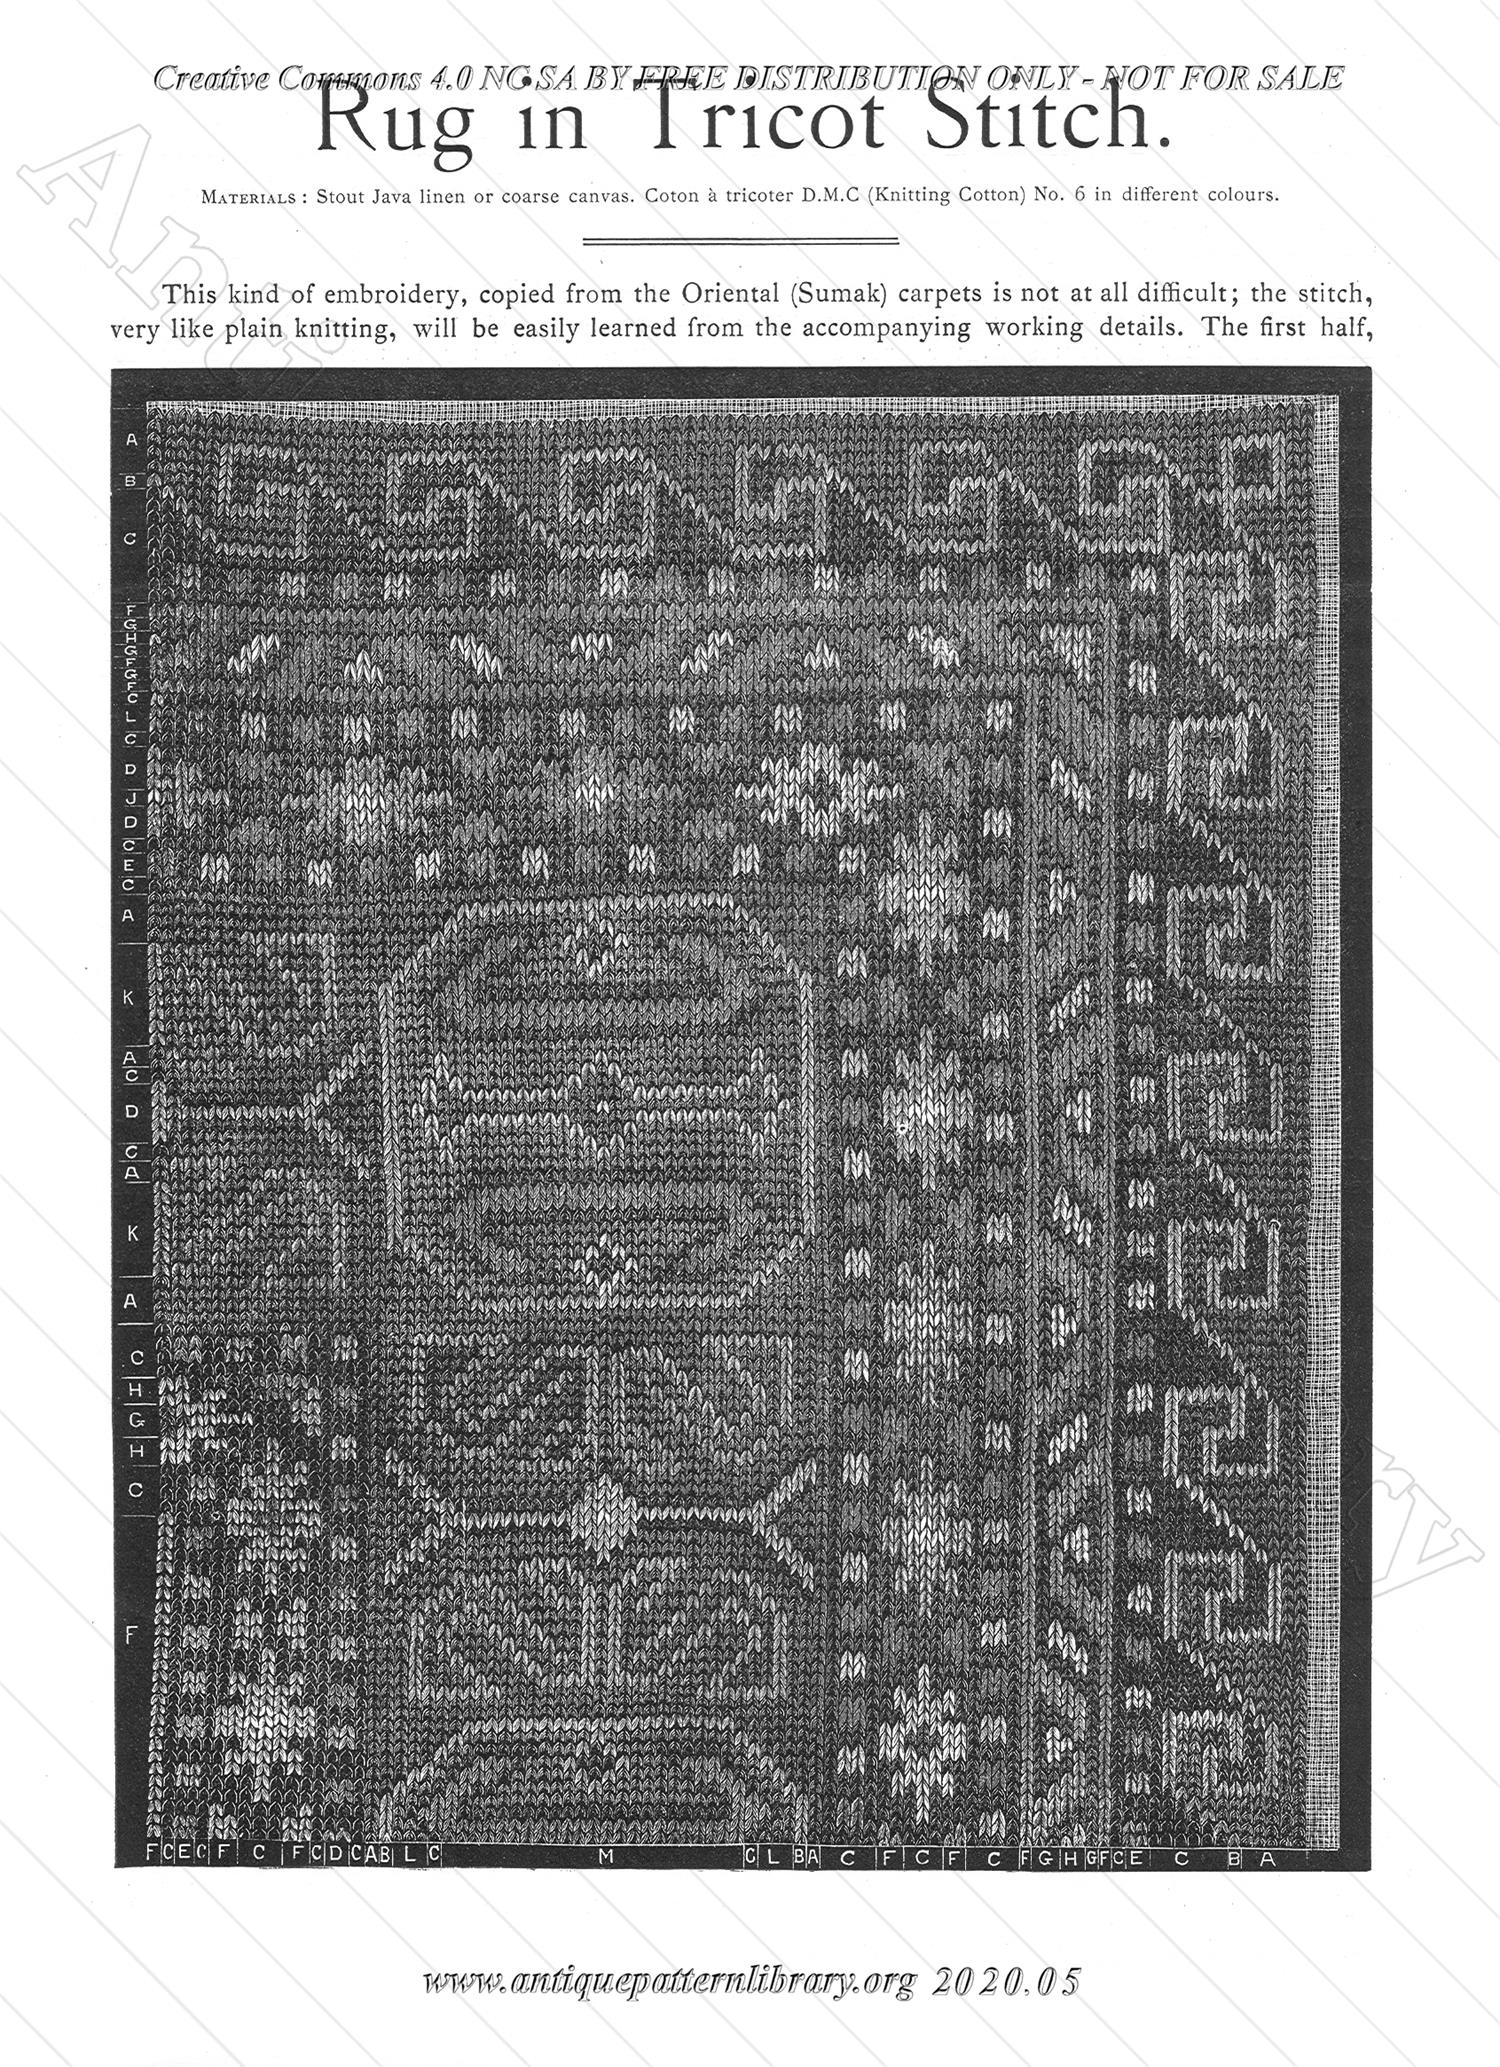 A-SW001 New Patterns in Old Style, First Part.